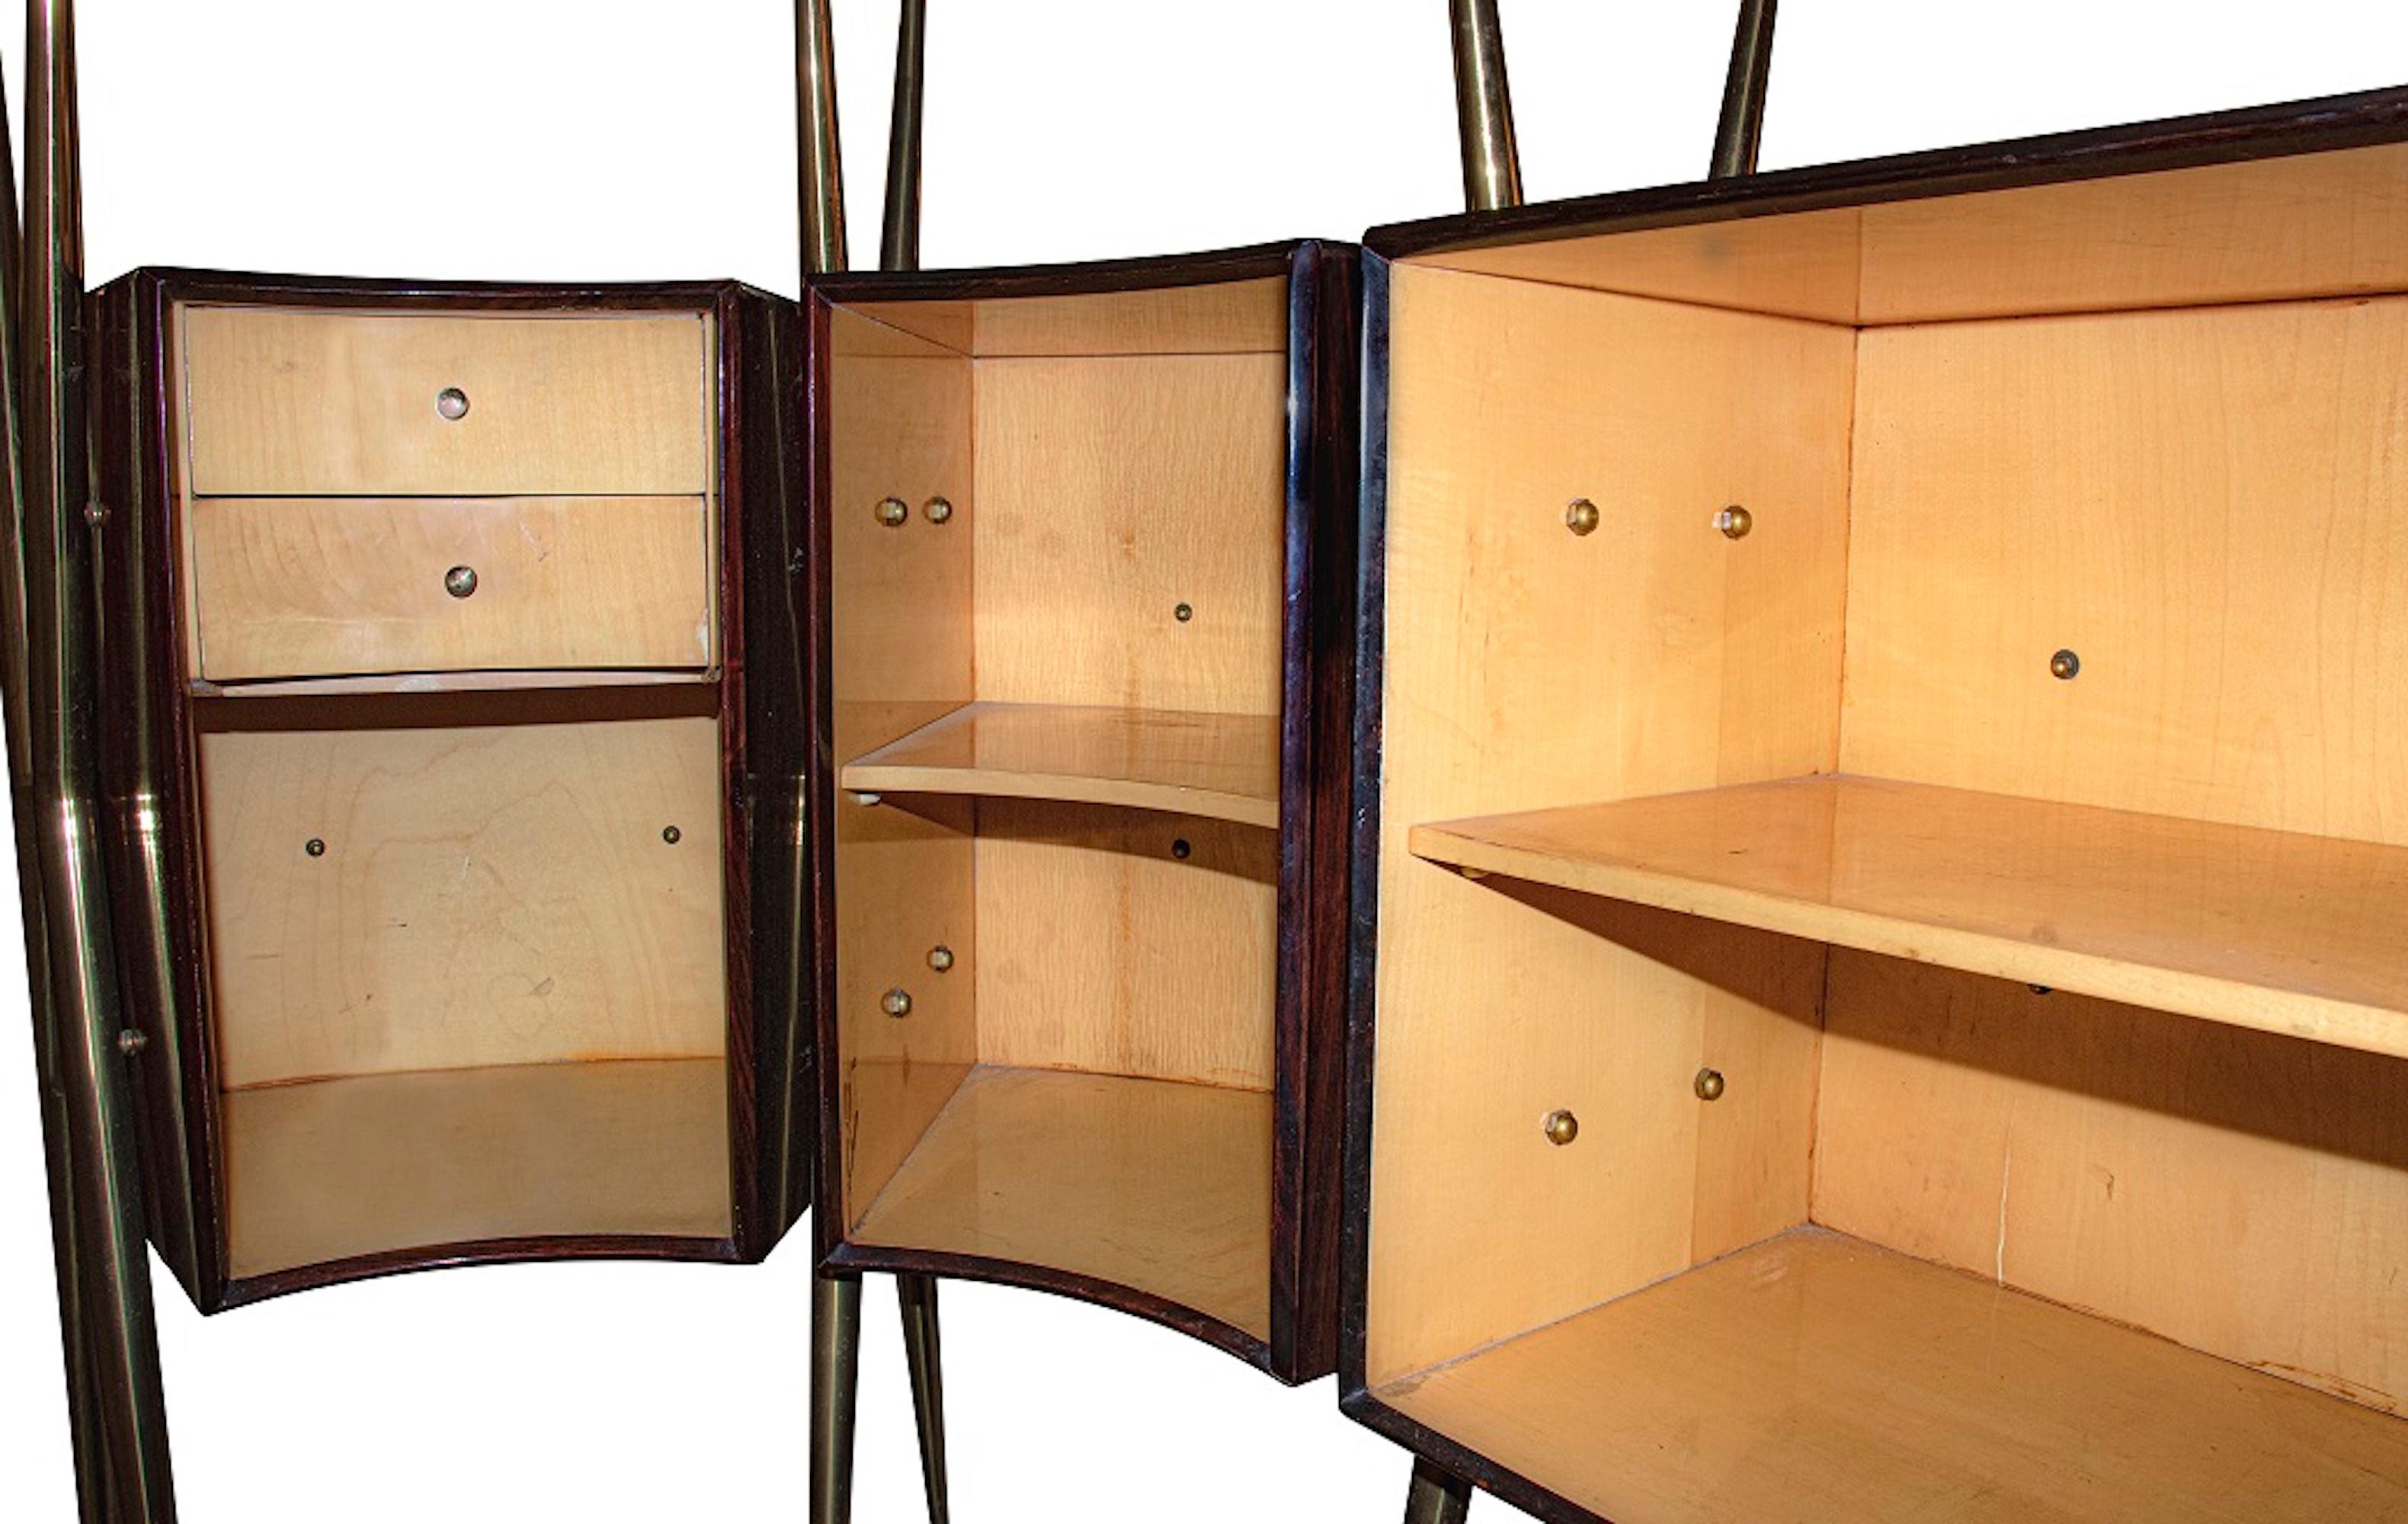 Vintage Italian Dry Bar Attr. to Gio Ponti, 1950 ca In Good Condition For Sale In Roma, IT